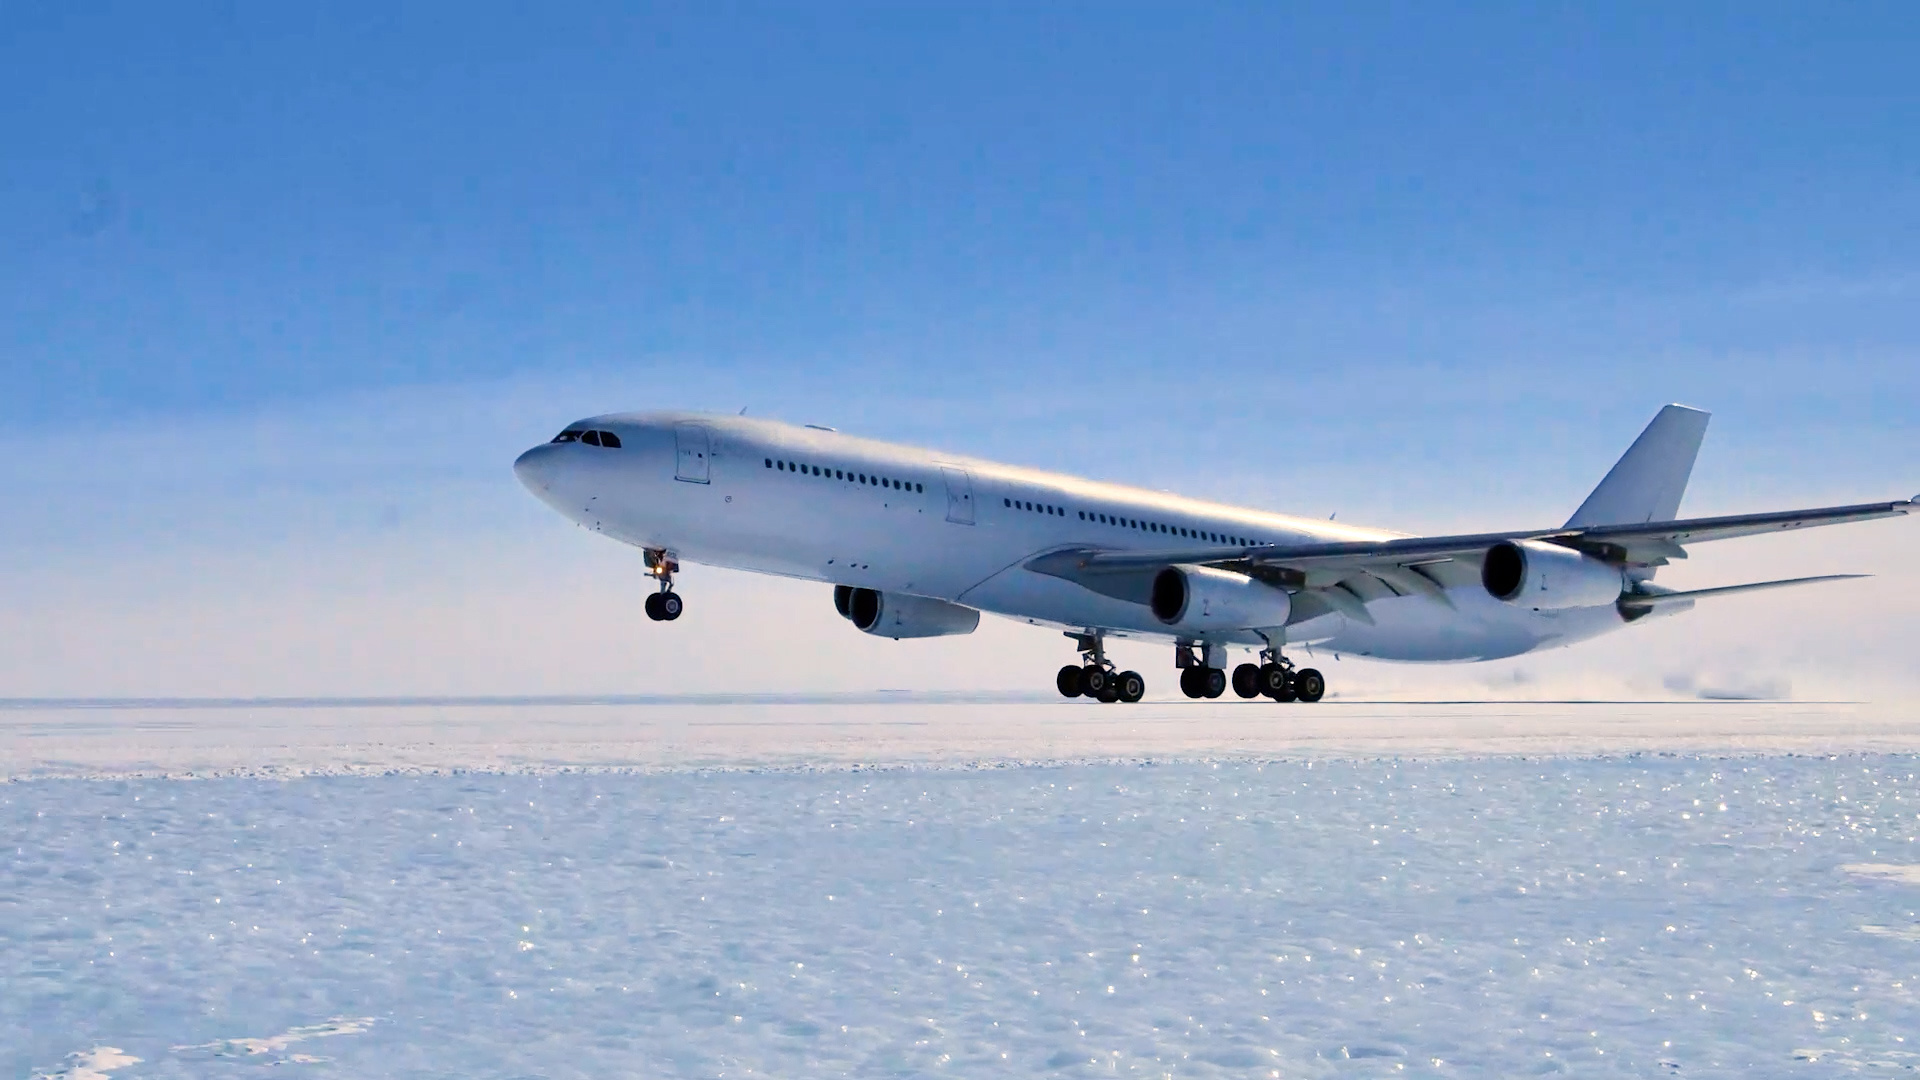 Airbus A340 plane lands on Antarctica for first time | CNN Travel 1920x1080